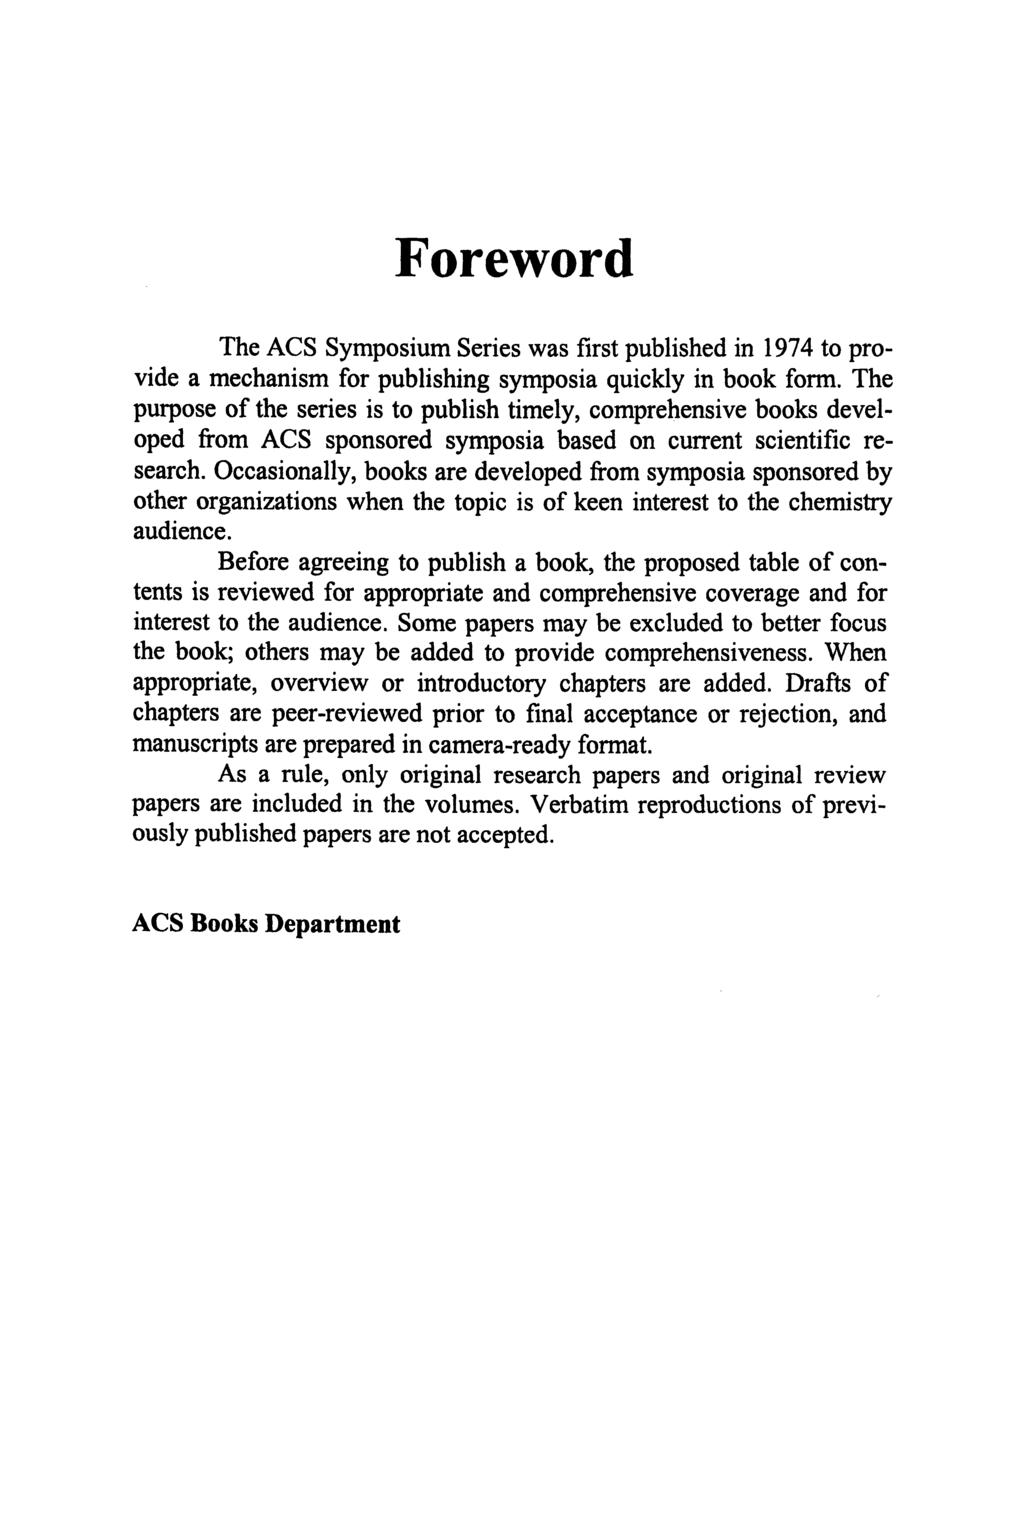 Foreword The ACS Symposium Series was first published in 1974 to provide a mechanism for publishing symposia quickly in book form.